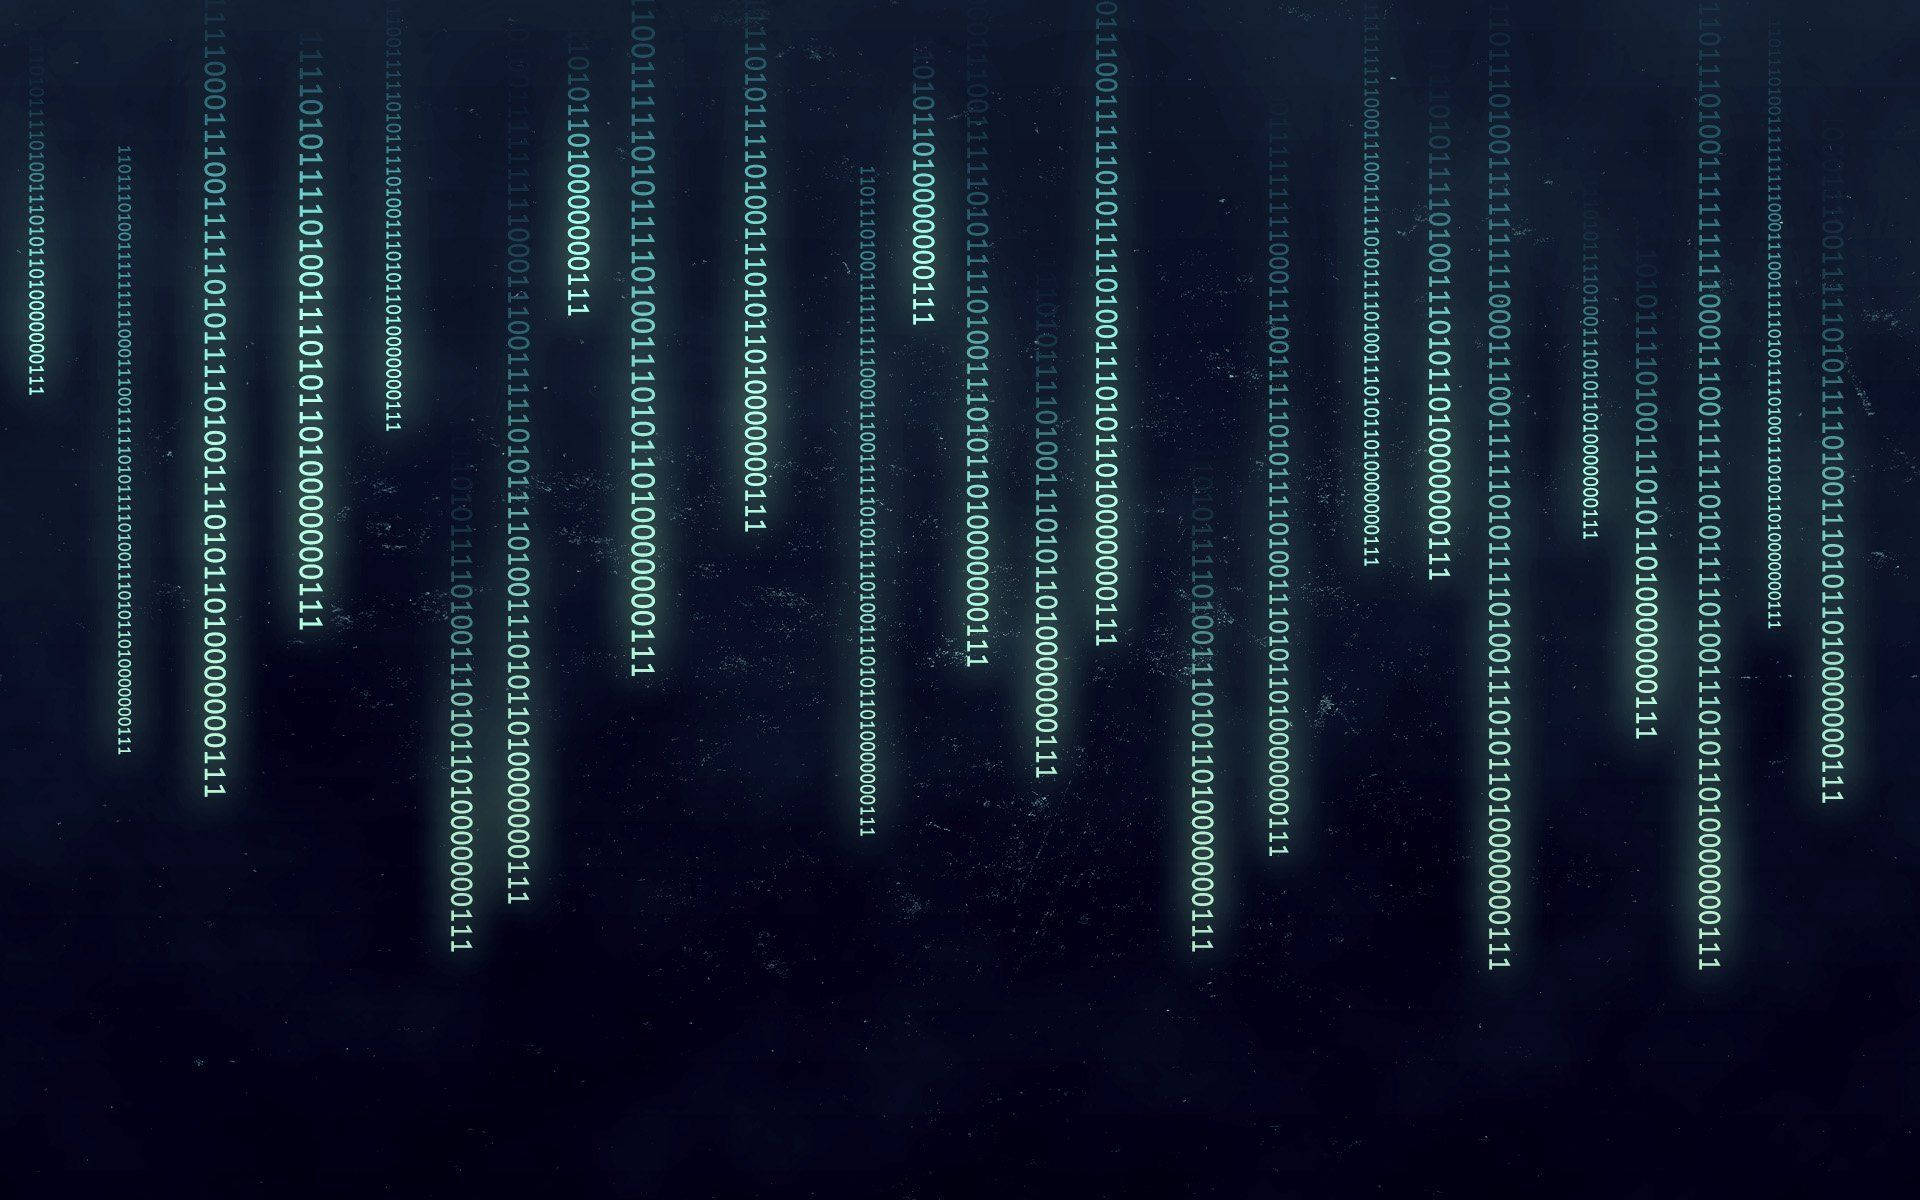 The Power of Computer Science Explored Through Binary Code Wallpaper